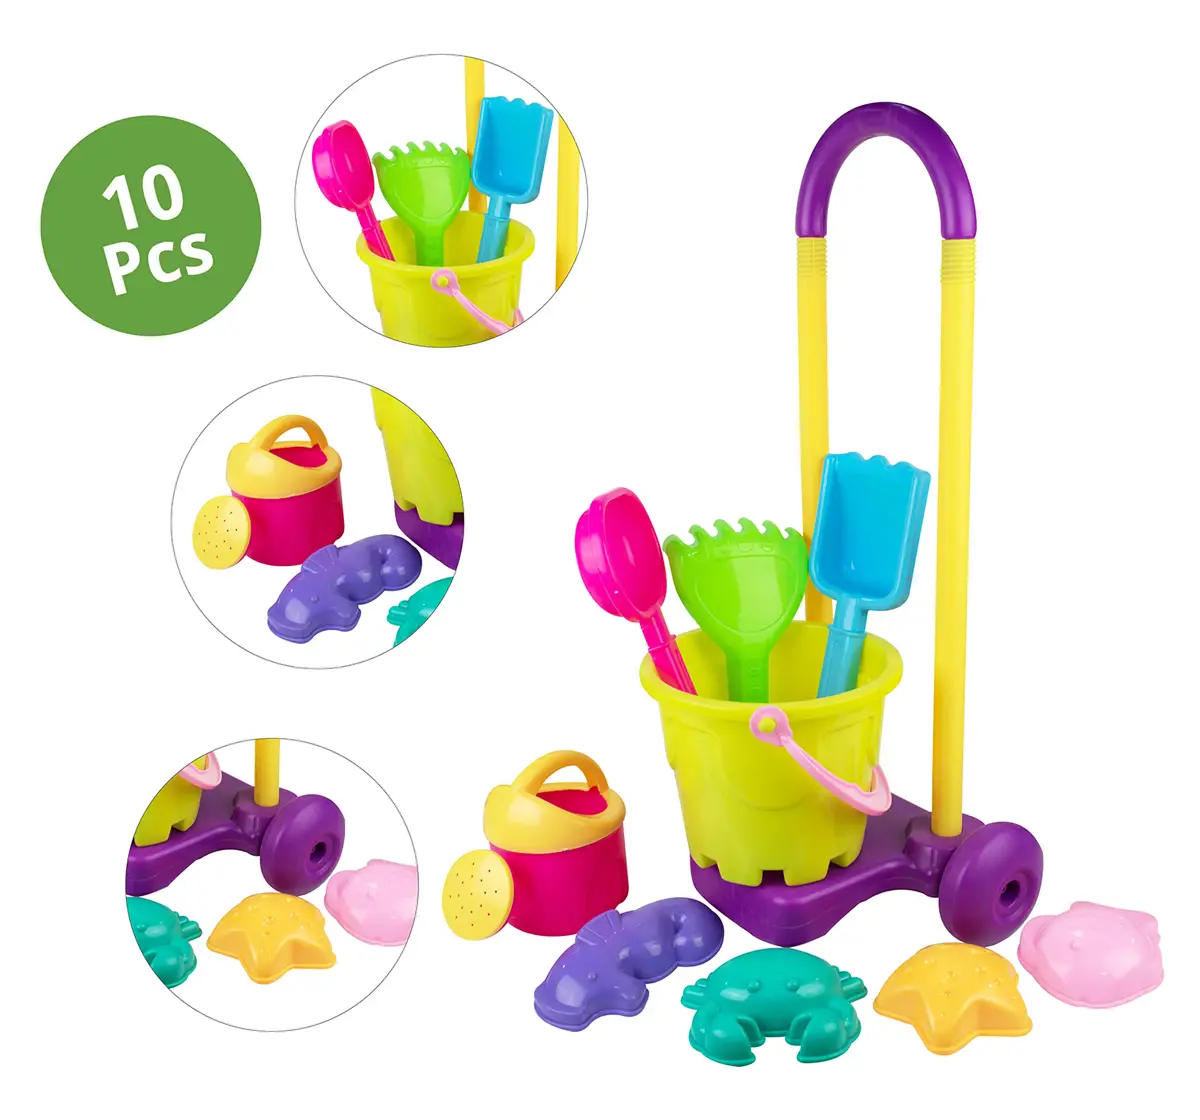 Zoozi Beach set with Trolley for kids Multicolor 18M+